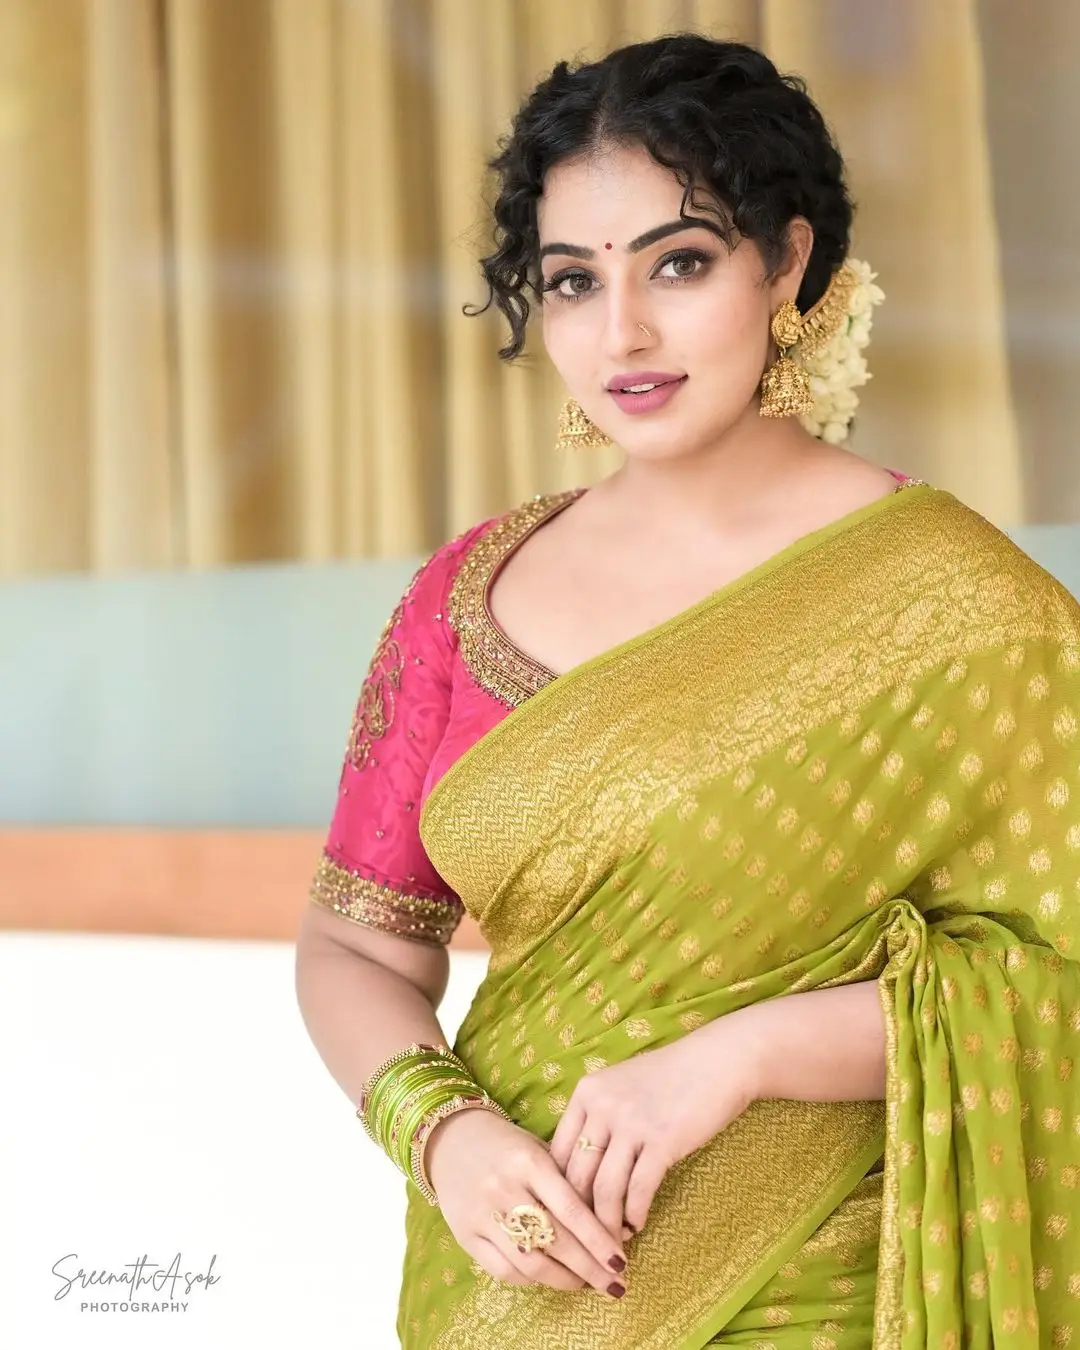 MALAVIKA MENON IN SOUTH INDIAN TRADITIONAL GREEN SAREE RED BLOUSE